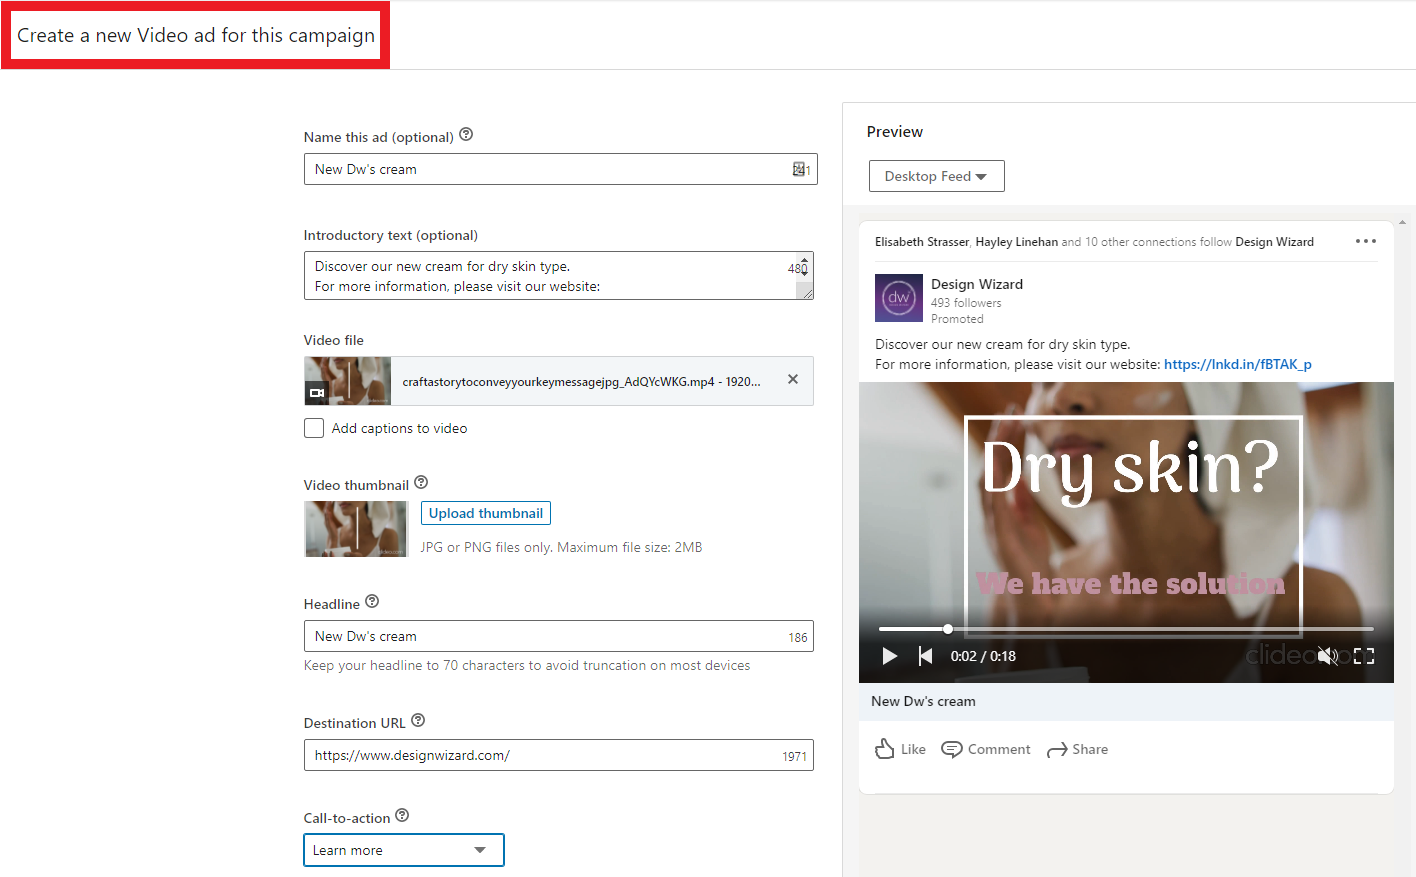 Video ad set up page - Step-by-step instructions for setting up a new video ad for LinkedIn - Image